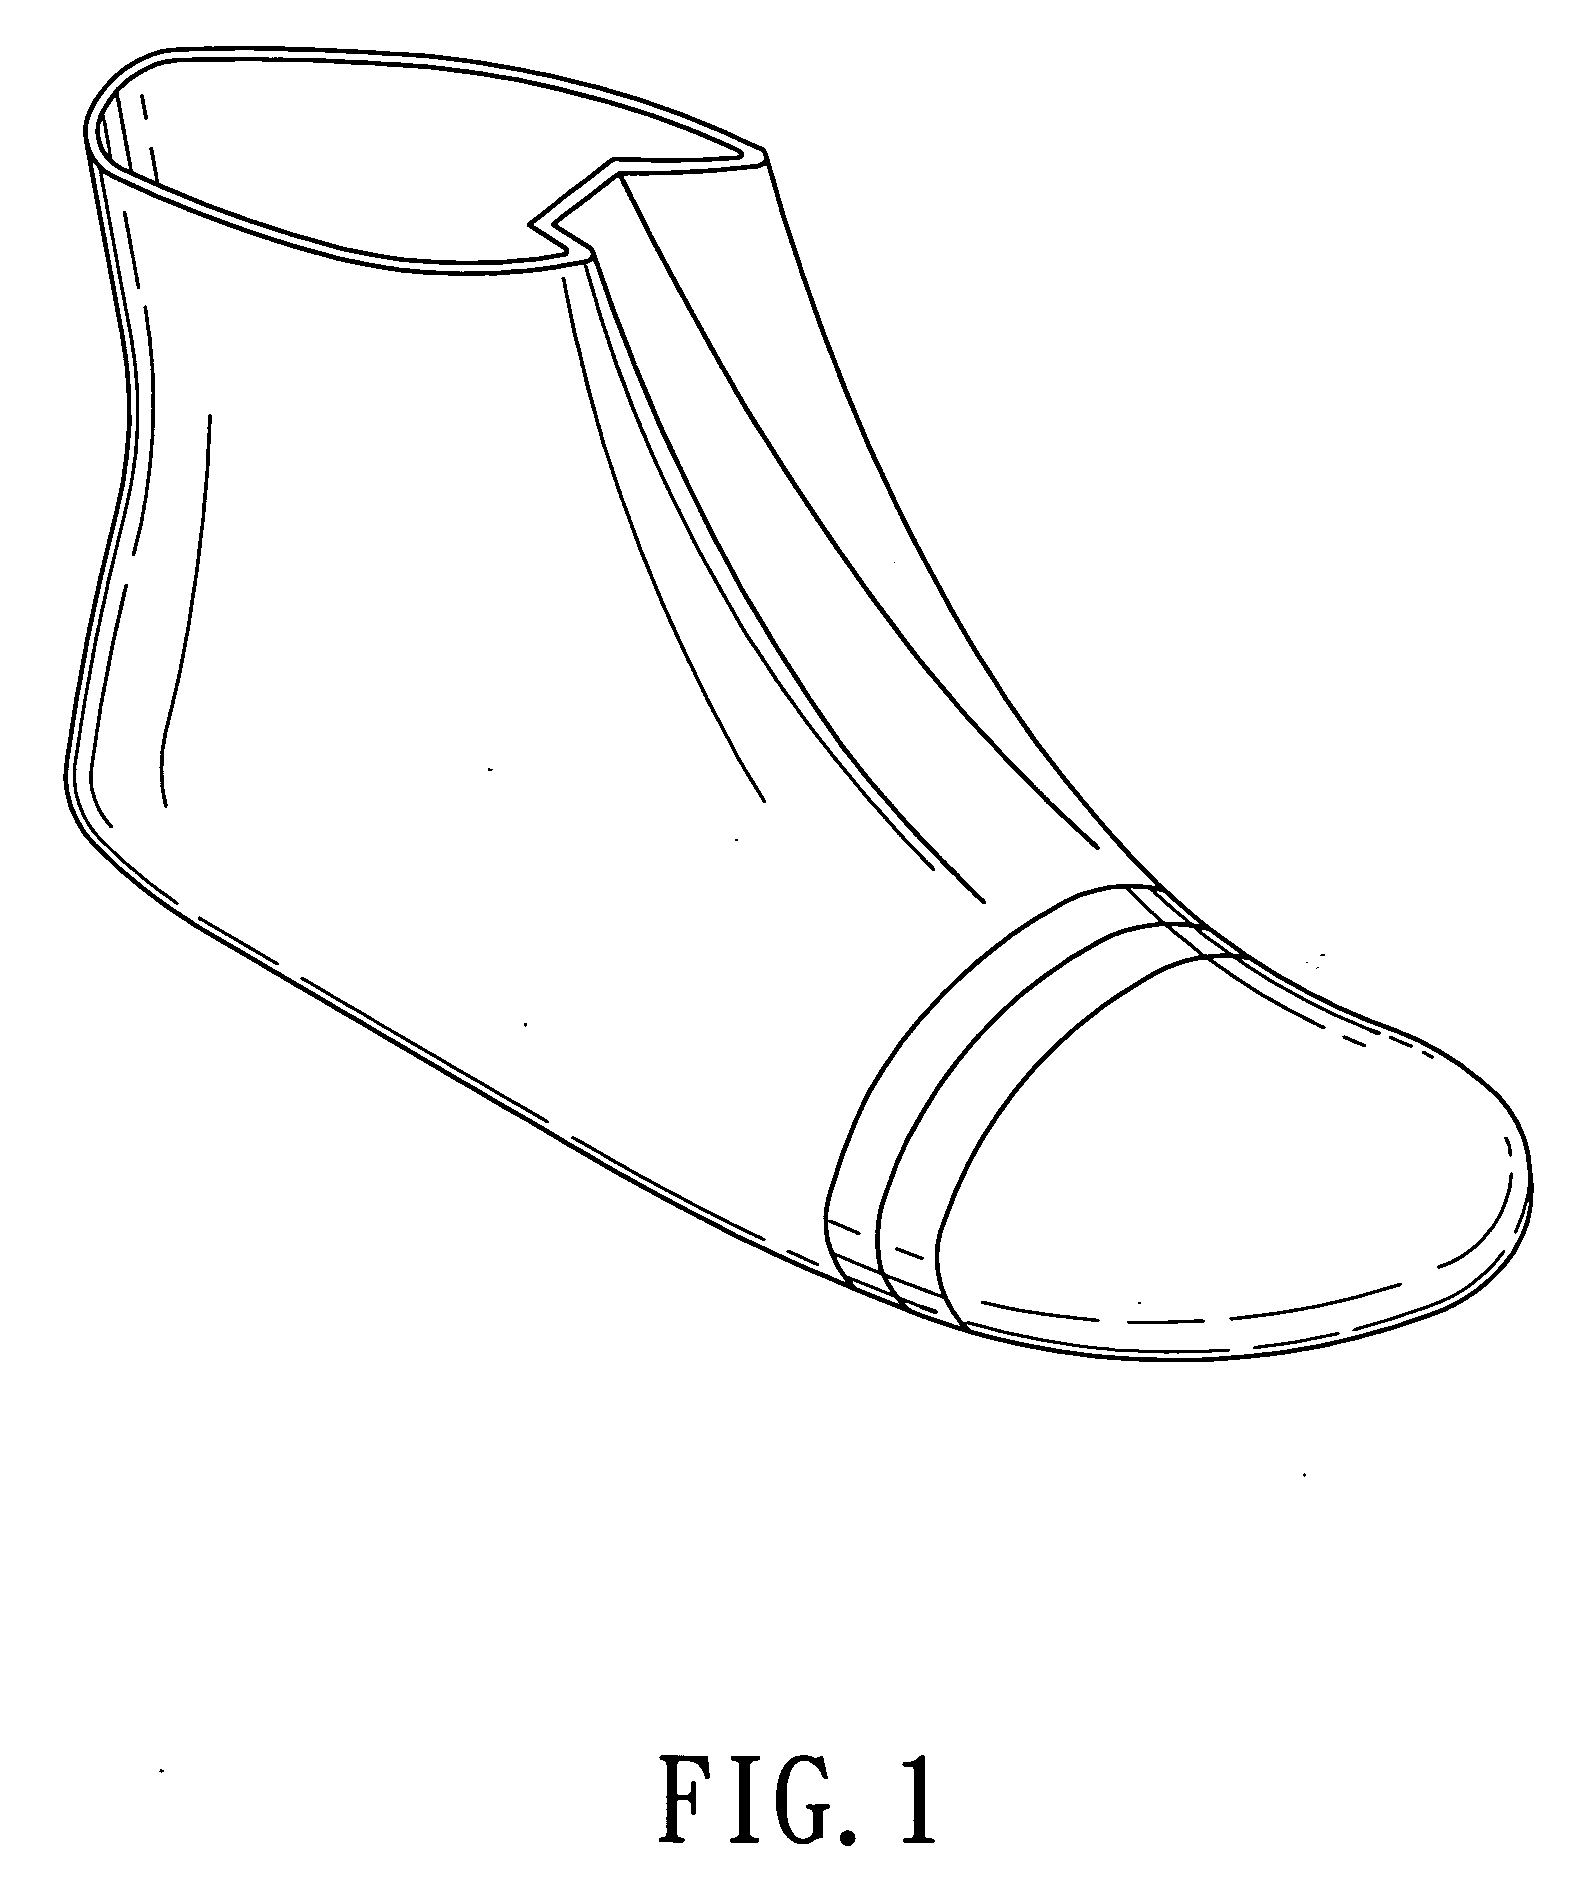 Shoe having an upper made of a waterproof breathable laminate